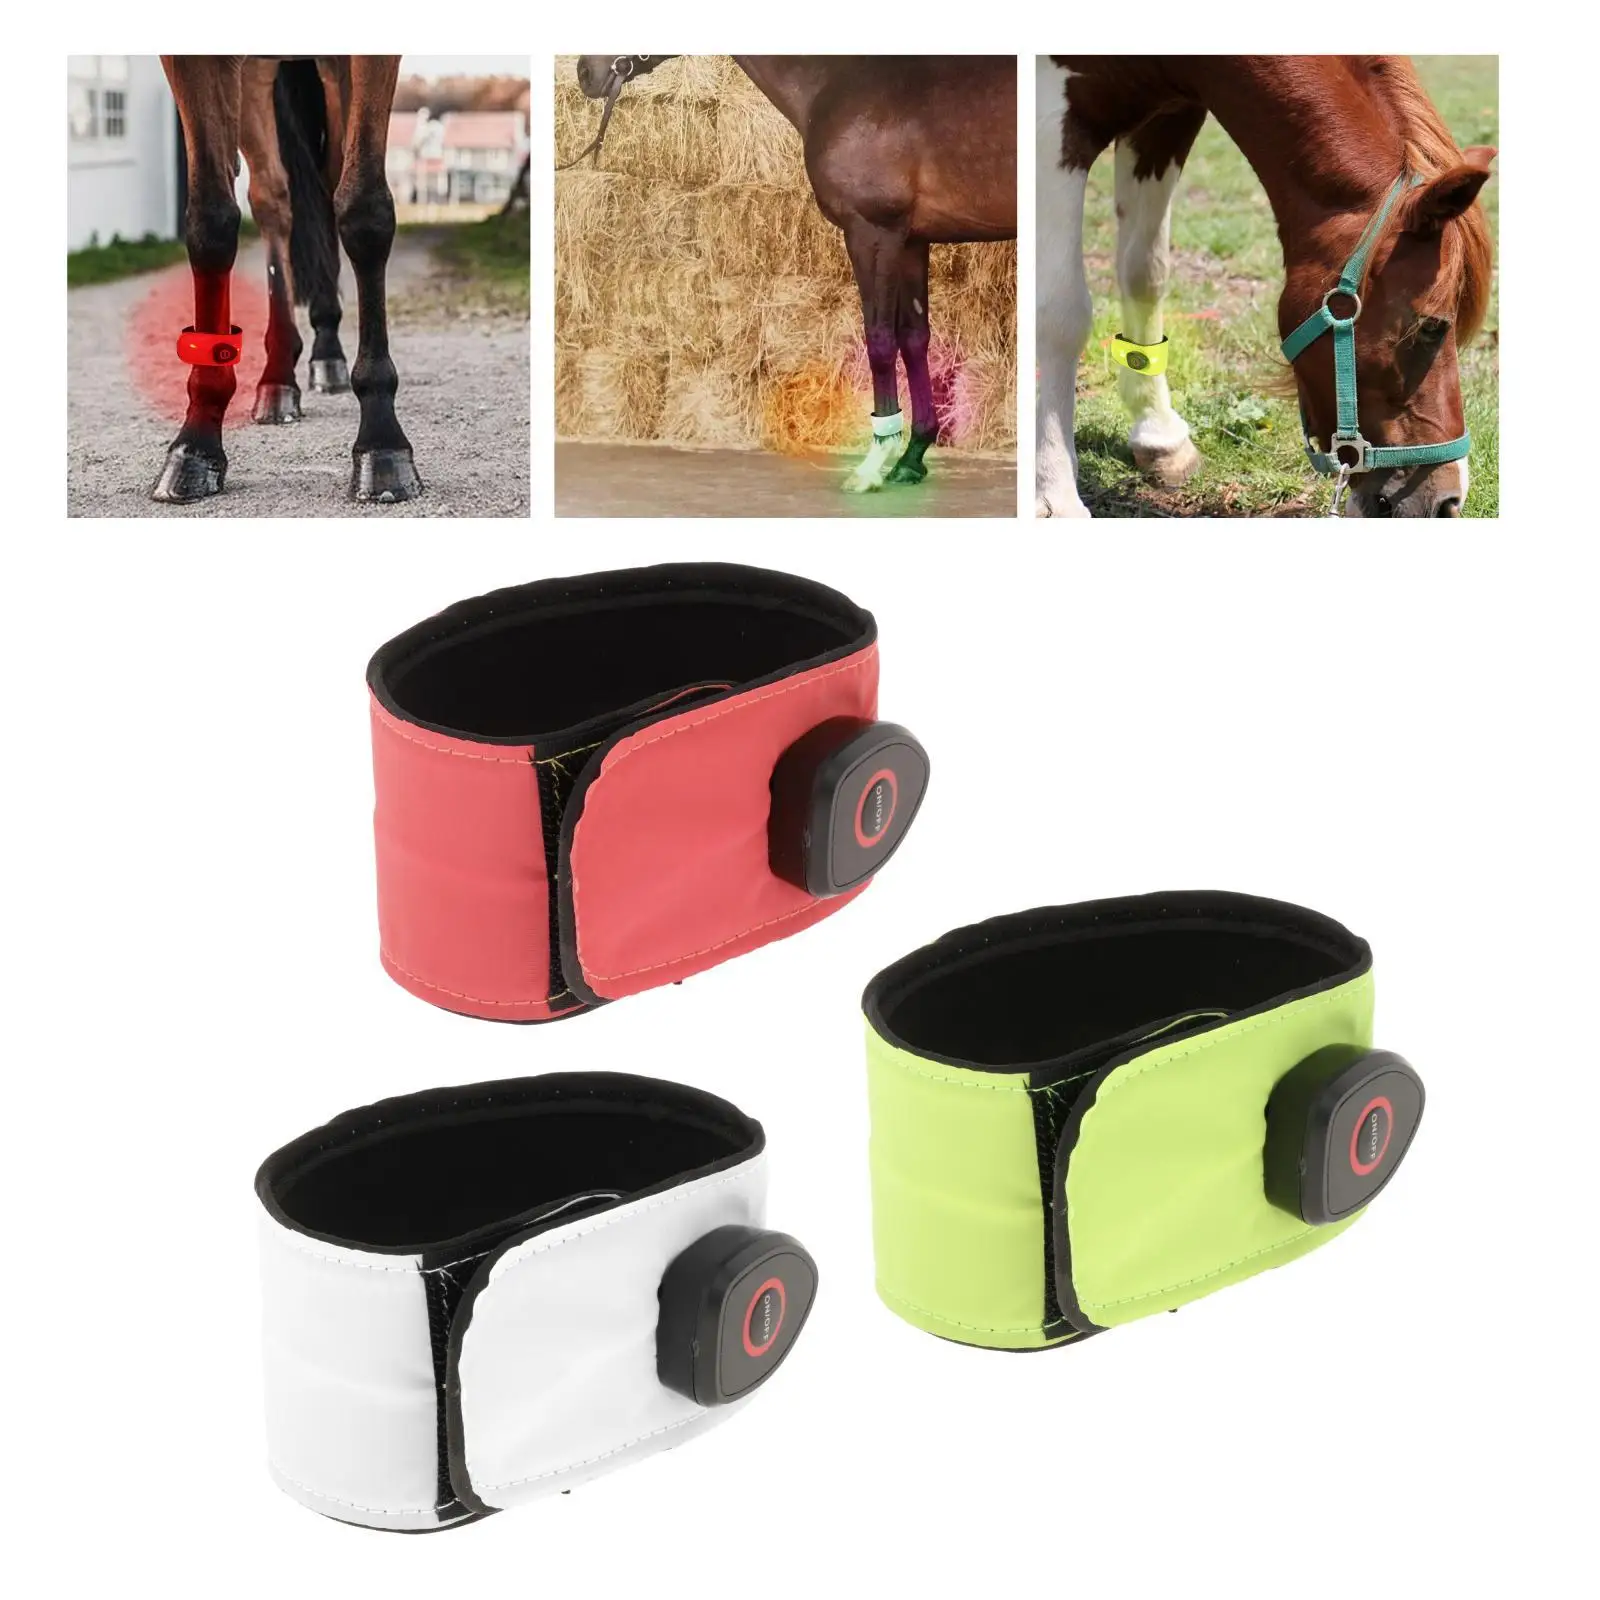 Reflective Horse Ankle Strap, Leg Safety , Belt,, Equestrian Supply for Outdoor Night, Riding, Running, Jumping